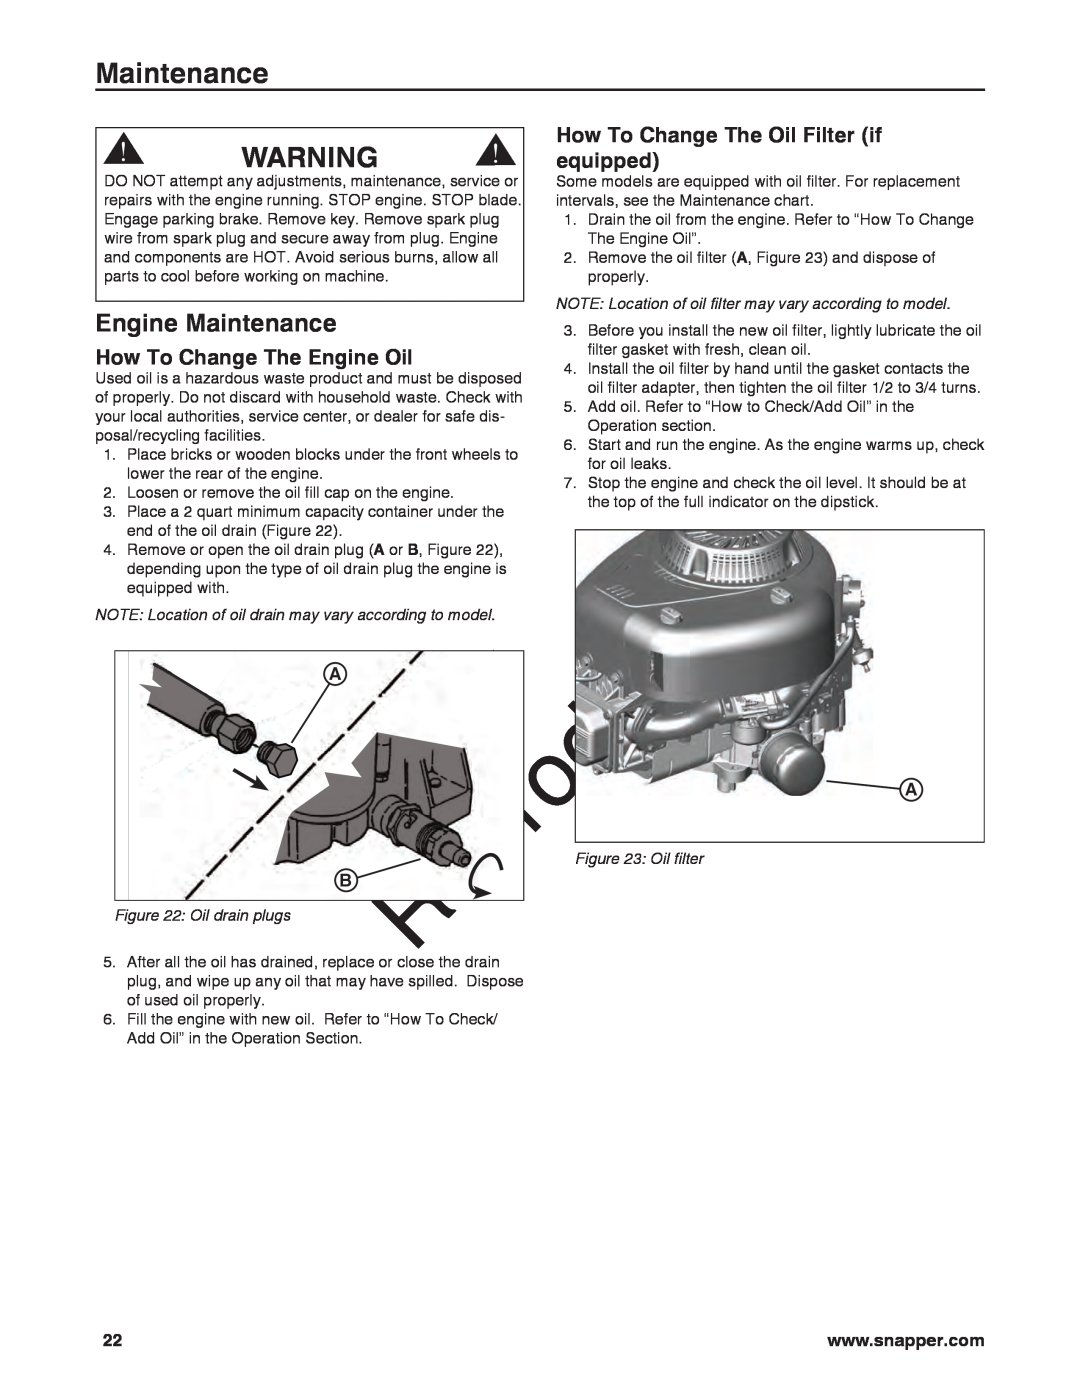 Snapper 7800920-00, 7800932-00 Engine Maintenance, How To Change The Oil Filter if, equipped, How To Change The Engine Oil 